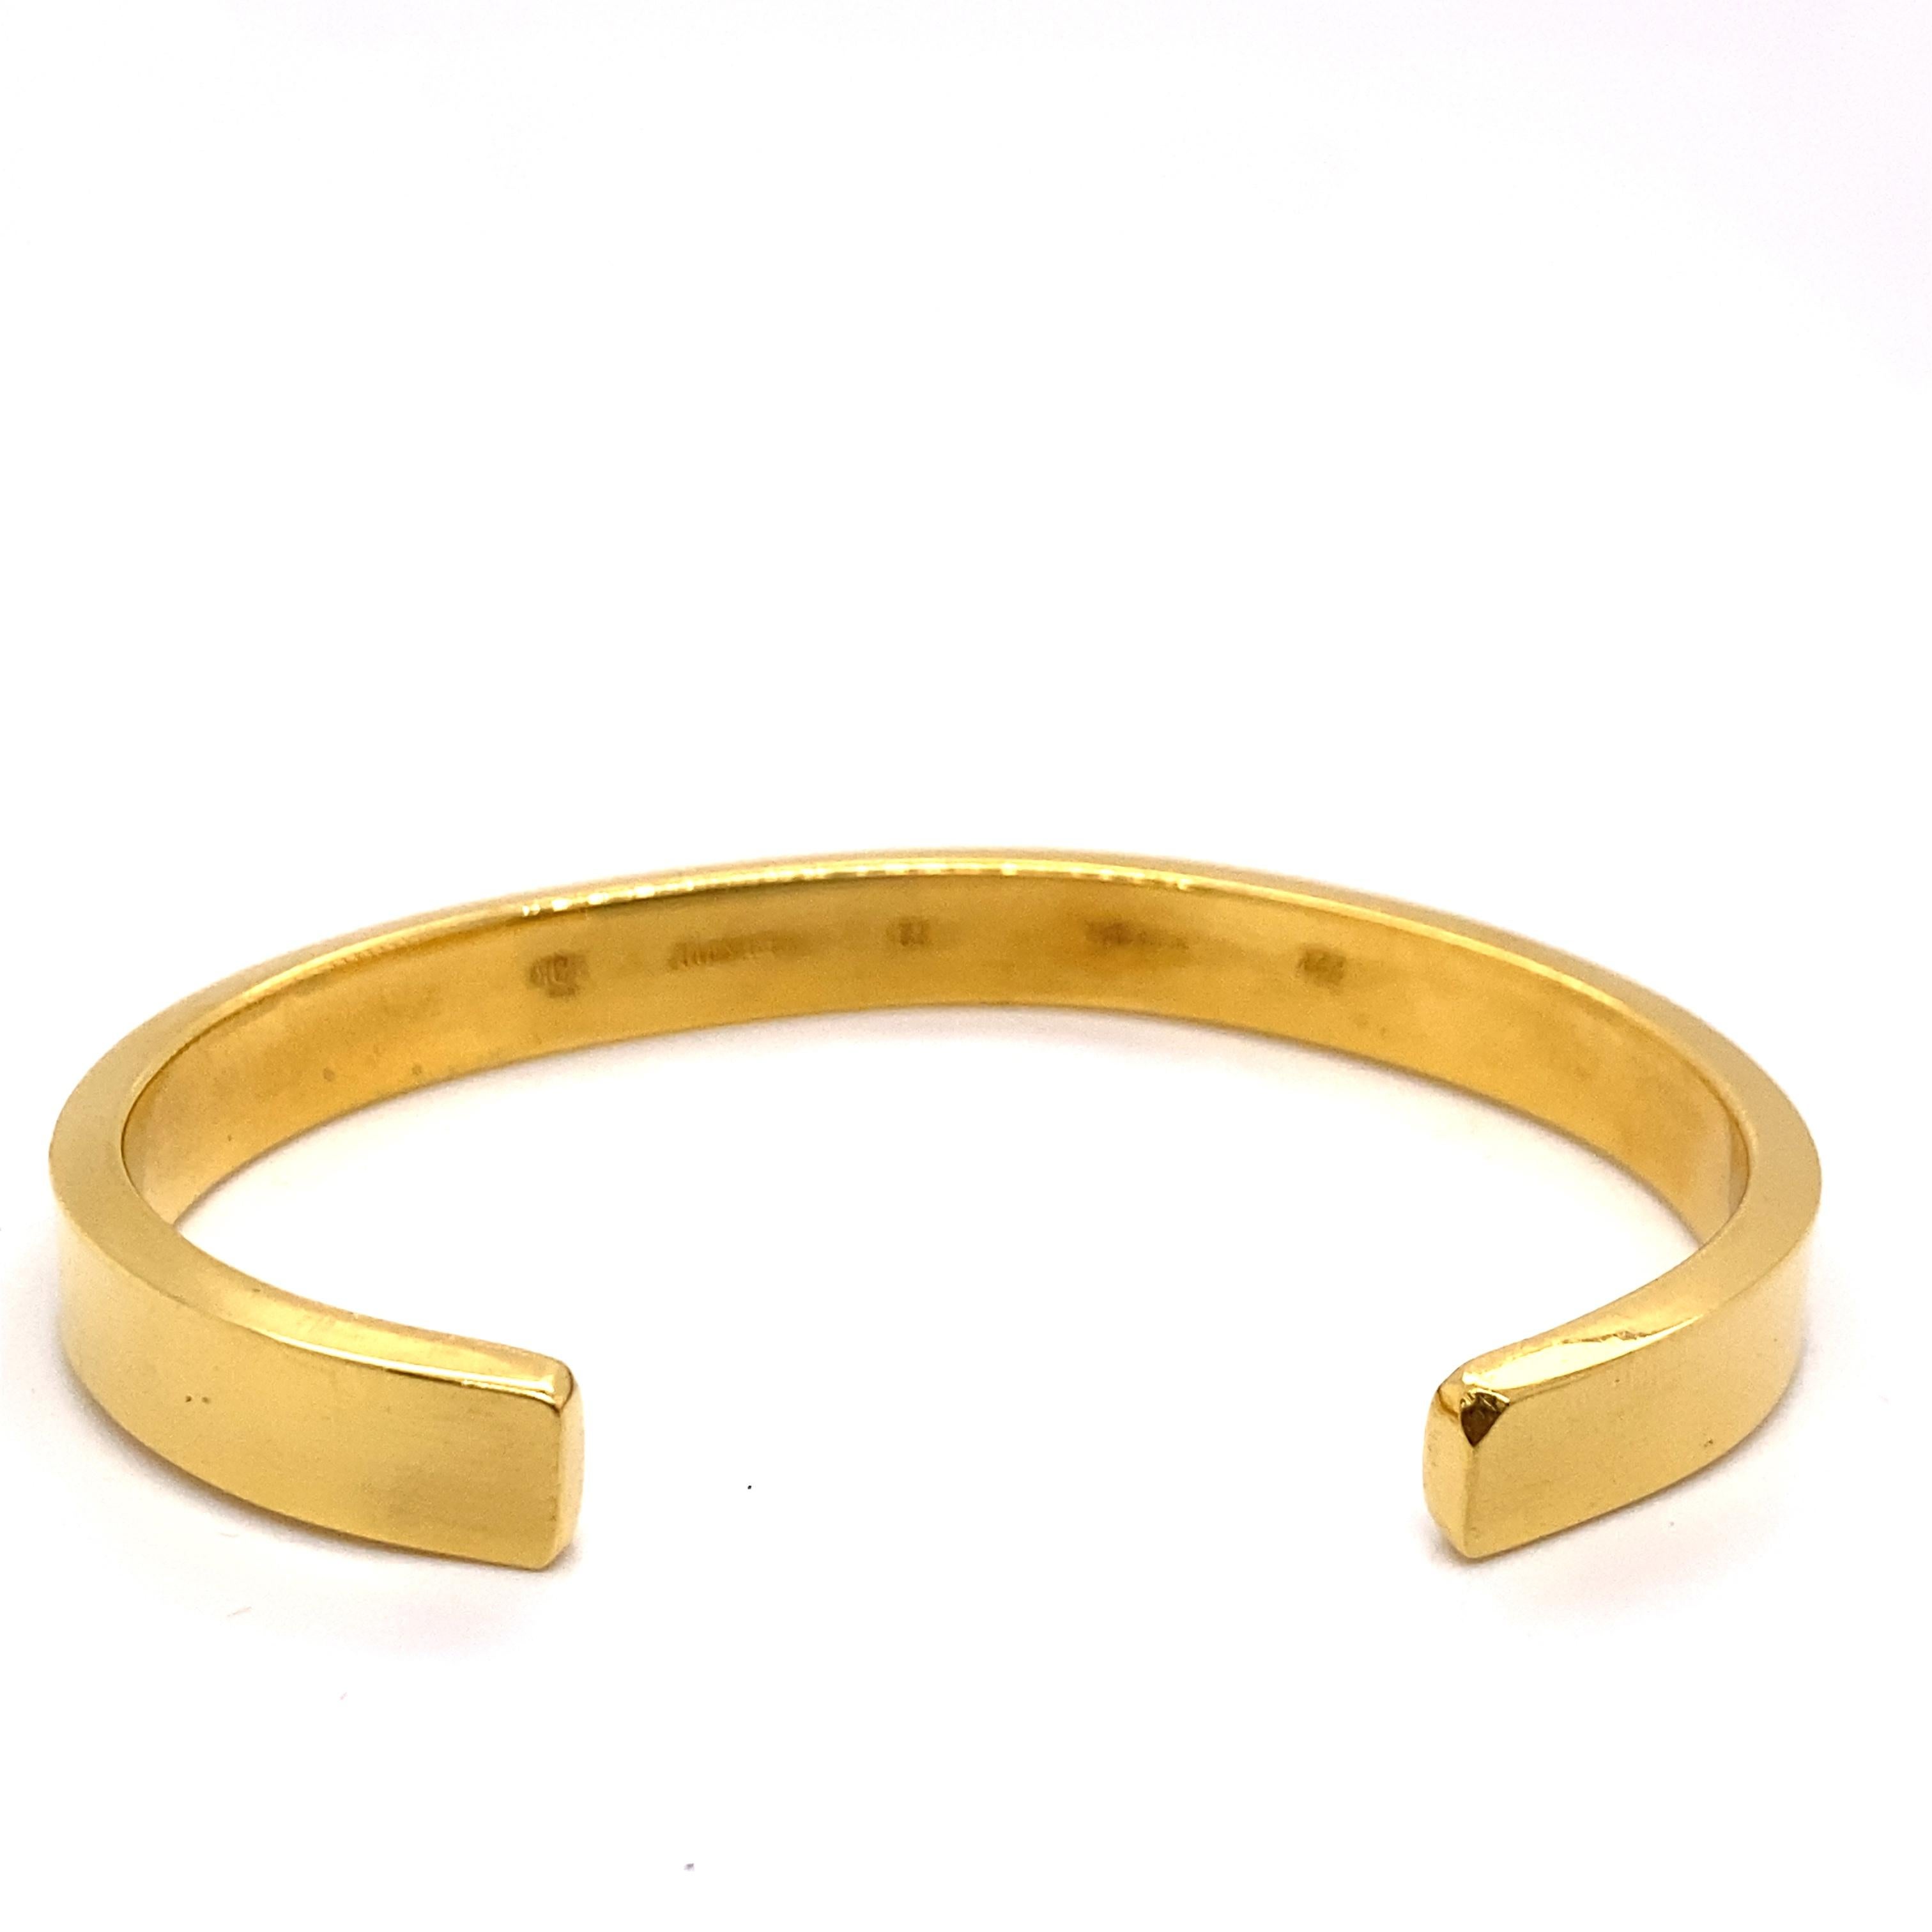 Vintage 22K Yellow Gold Cuff Bracelet - The width of the cuff bangle is .25 inches. The inside diameter is 2 inches high by 2.75 inches wide. It is stamped 22K and with the maker's mark 